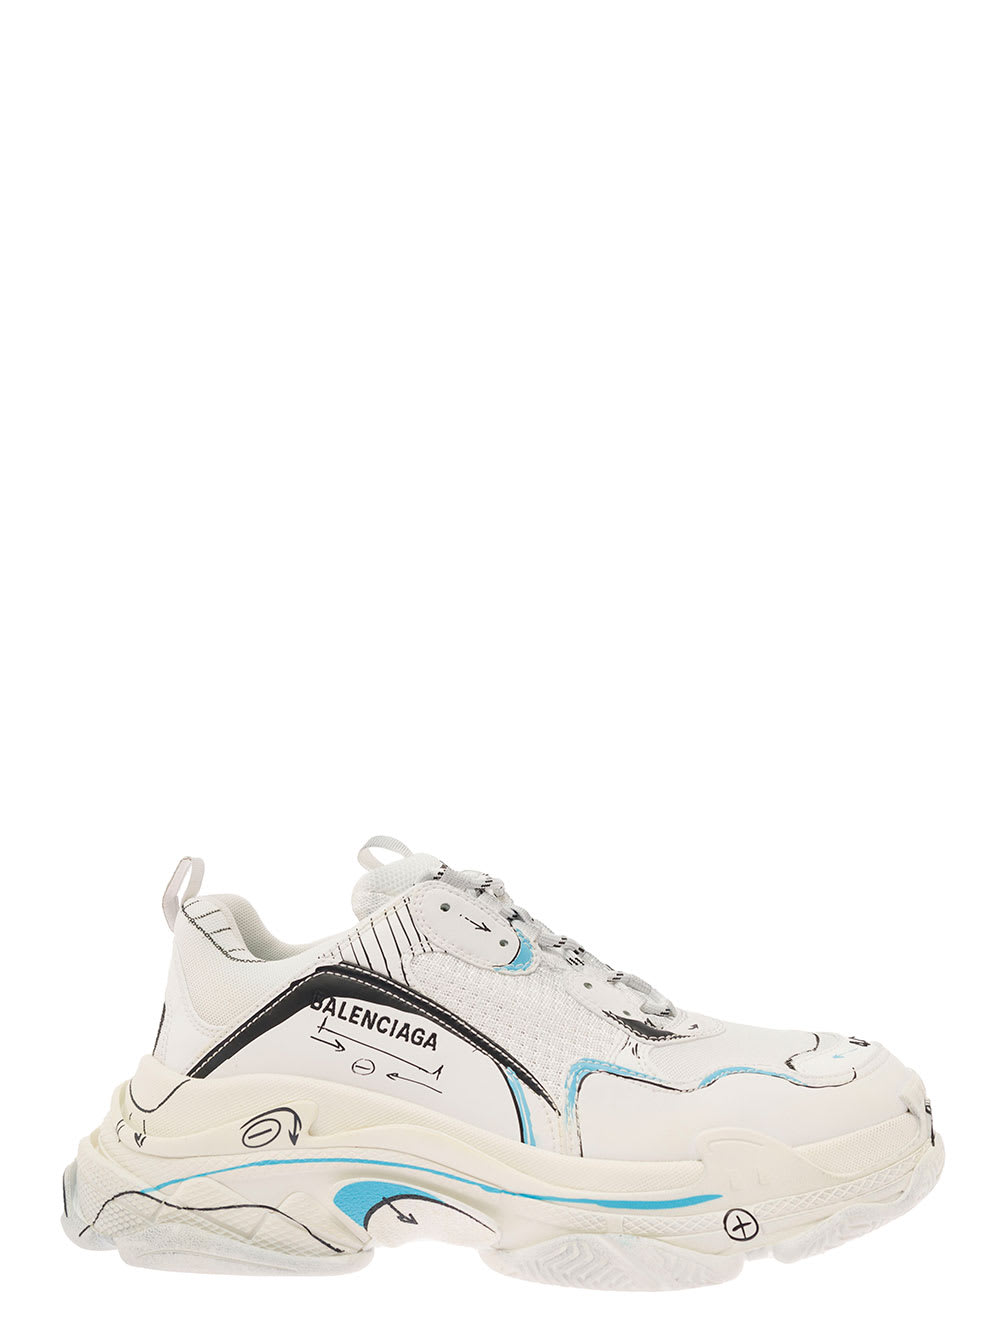 Balenciaga Triple S White Low Top Sneakers With Contrasting Sketch Print In Mix Of Tech Materials Man